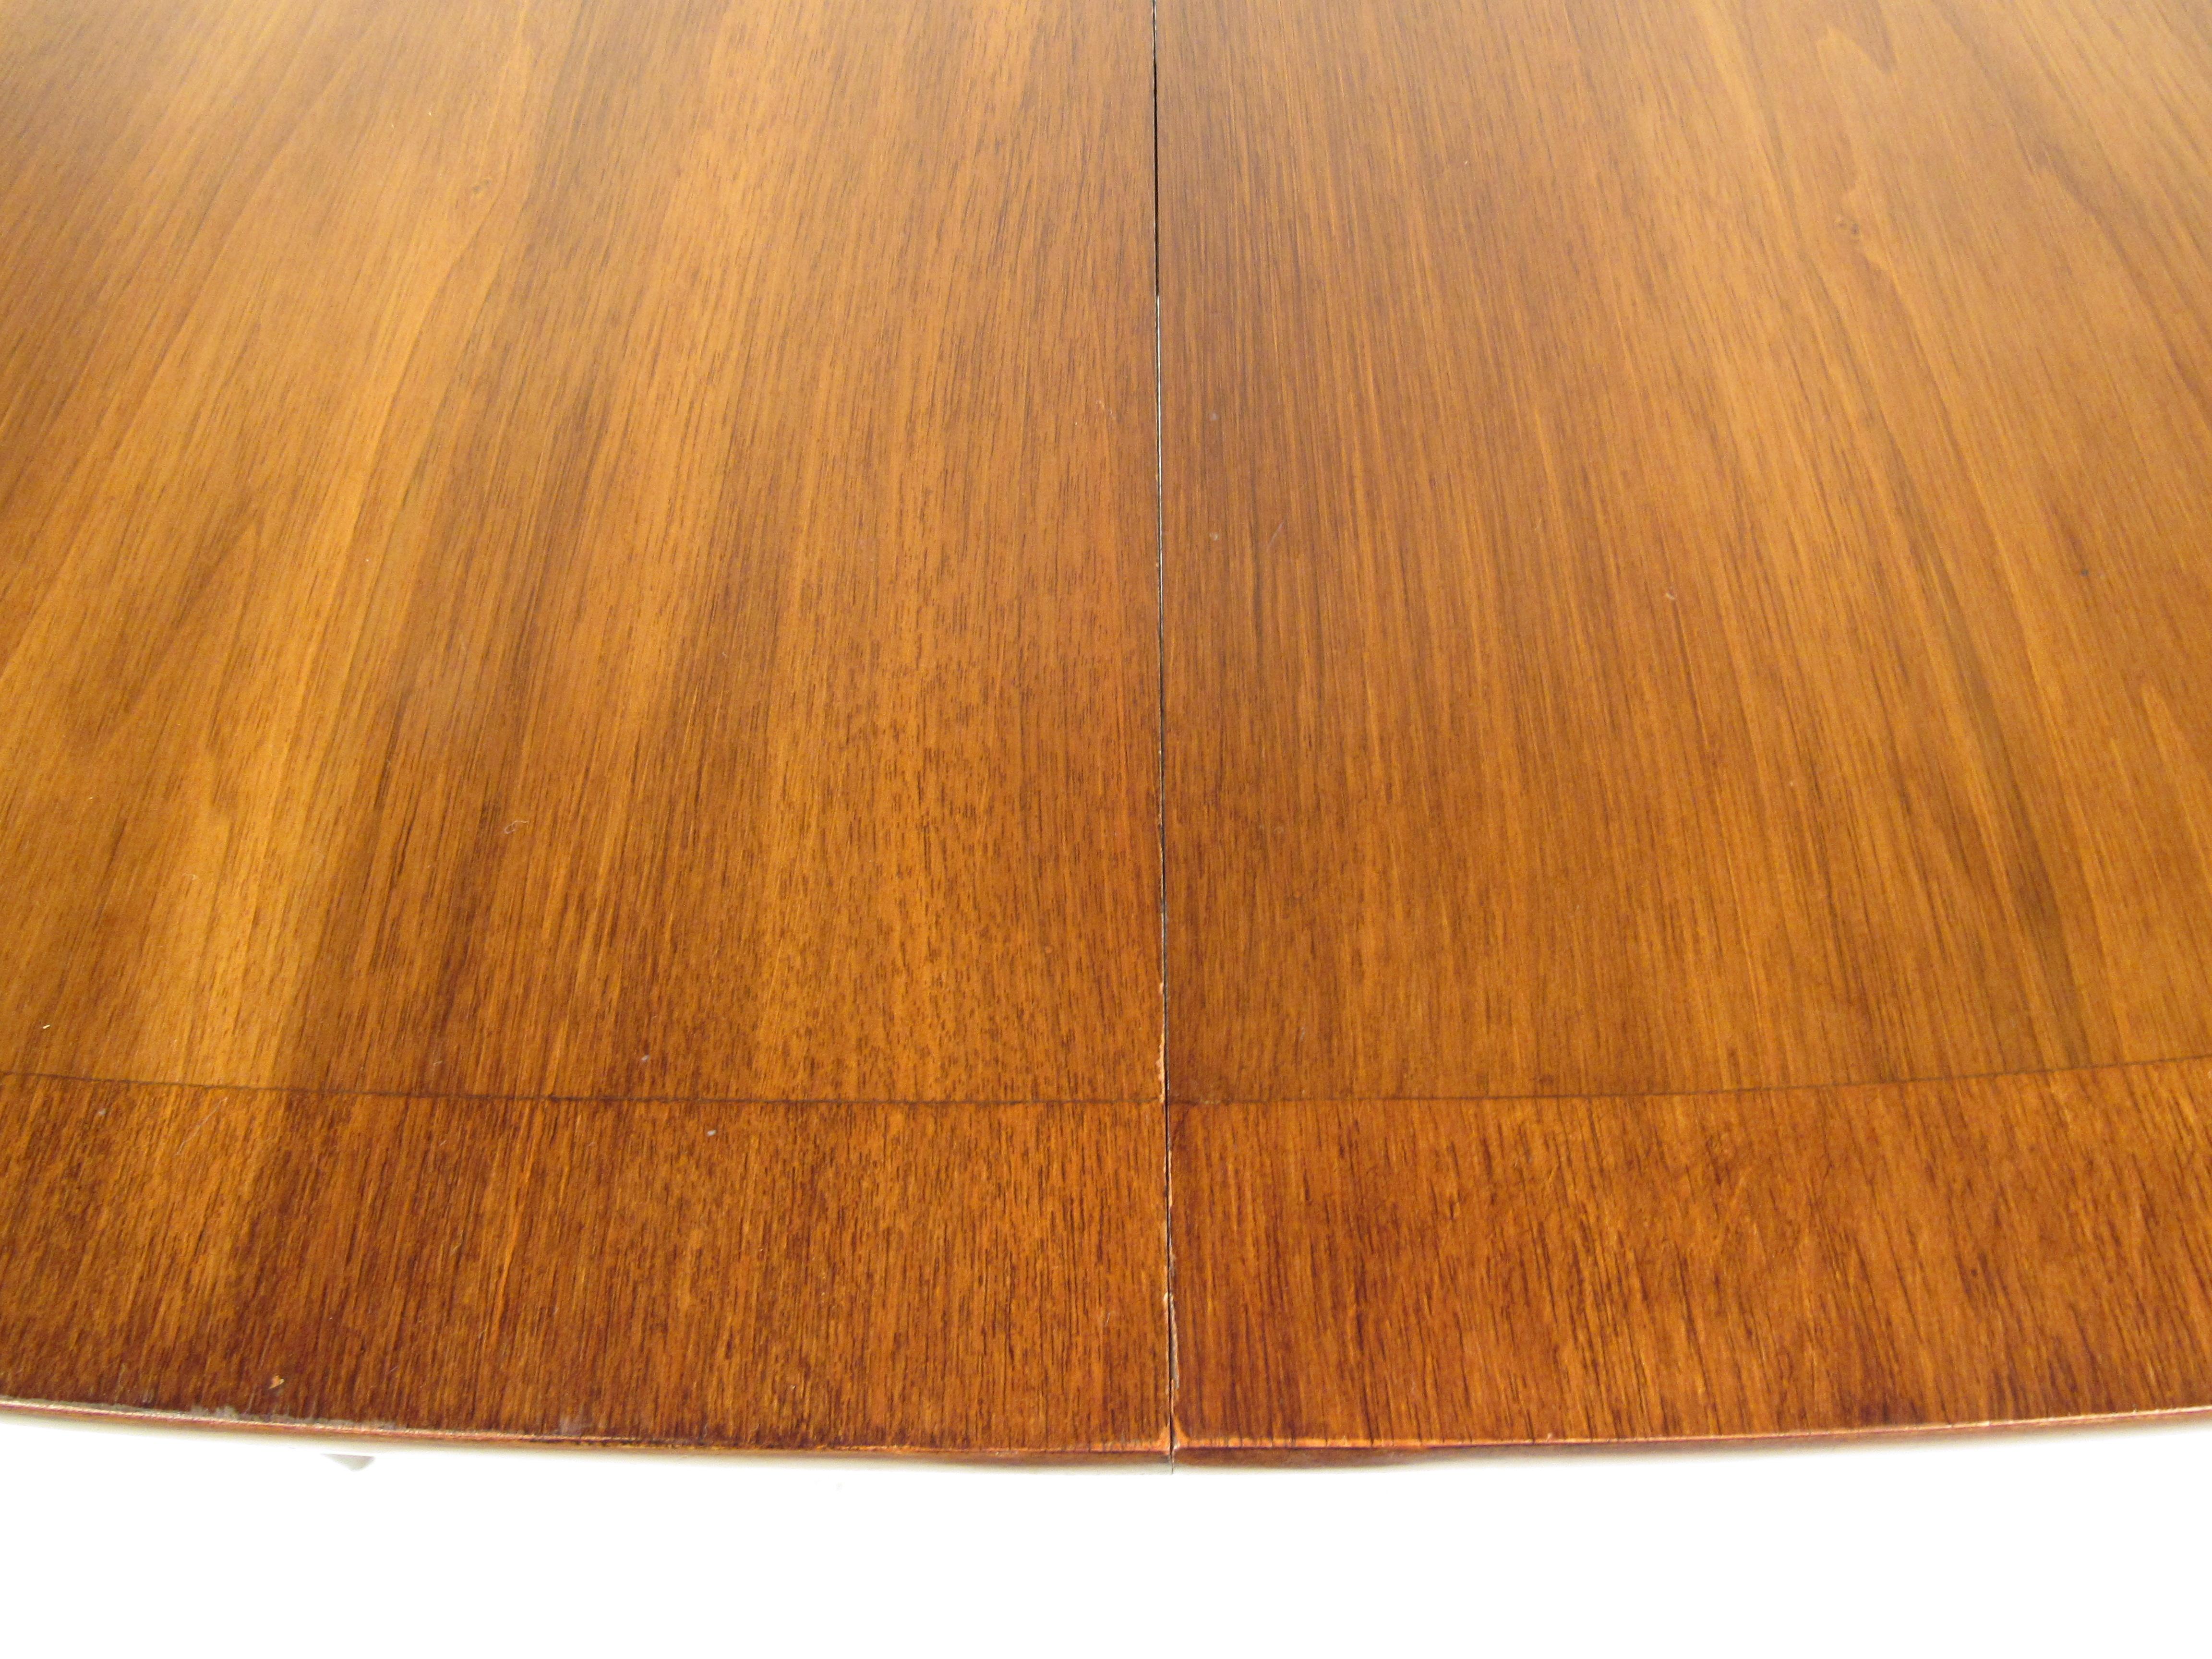 Late 20th Century Oval Midcentury Walnut Dining Table by White Furniture Company